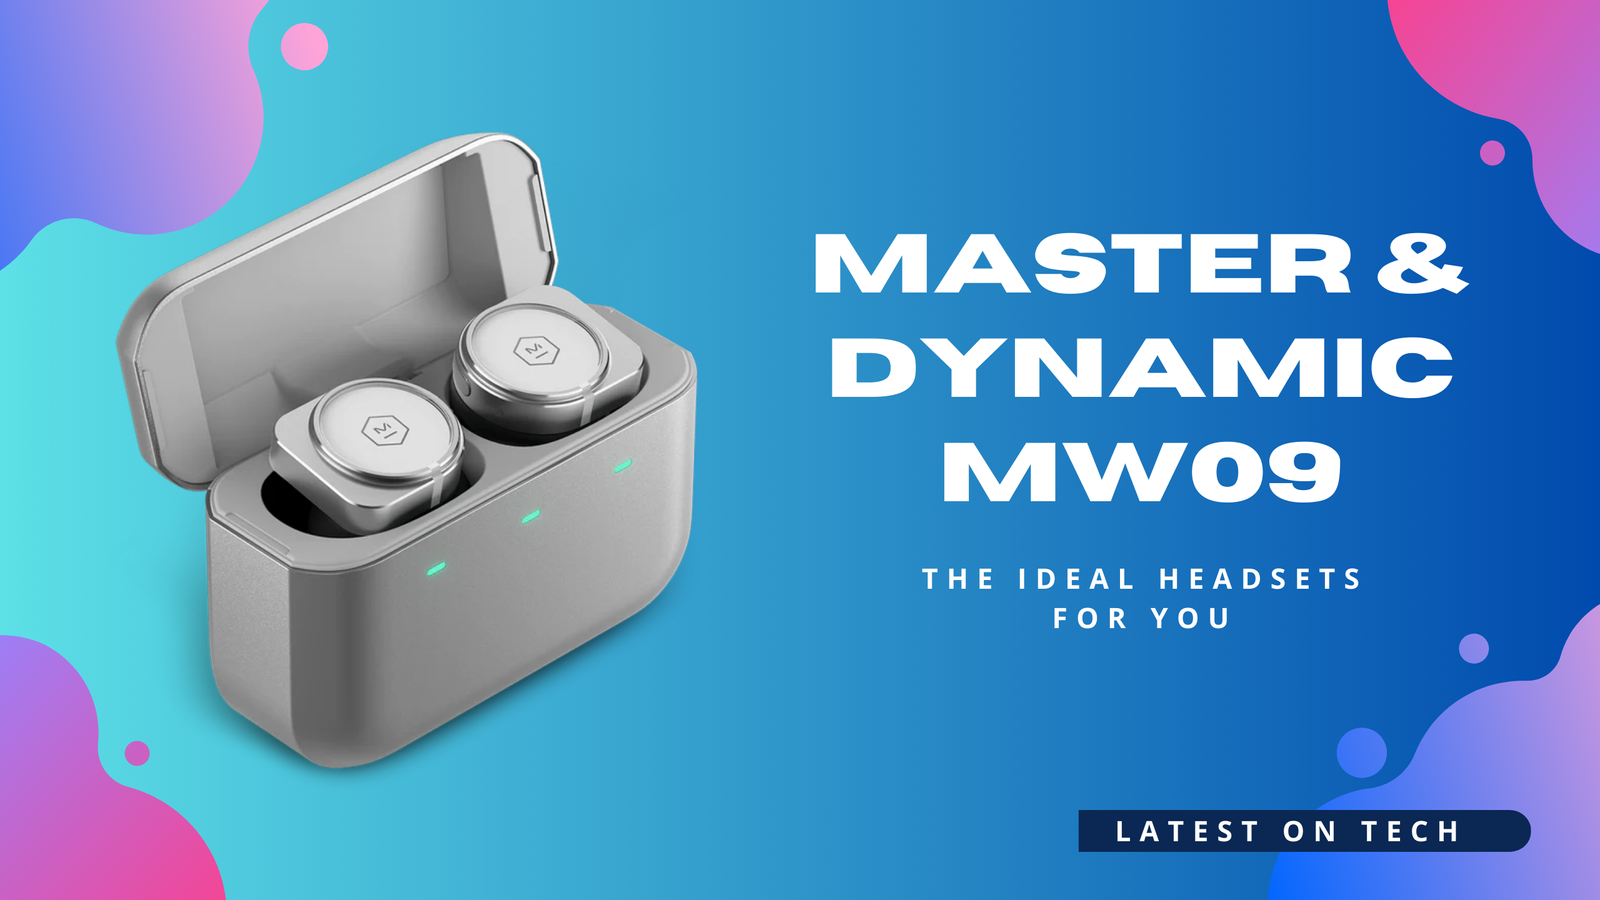 Master & Dynamic MW09: The Ideal Headsets For You